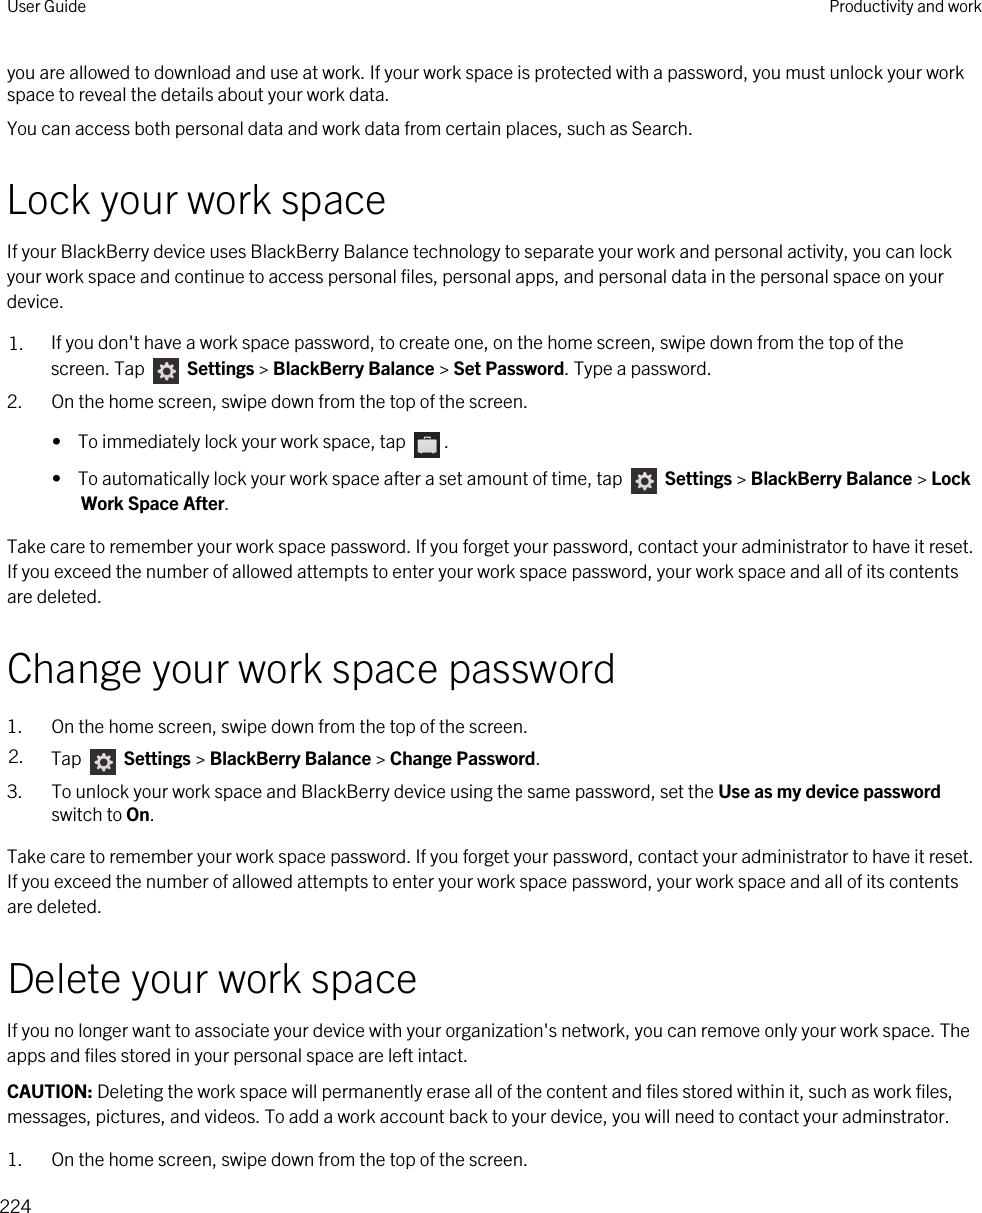 you are allowed to download and use at work. If your work space is protected with a password, you must unlock your work space to reveal the details about your work data.You can access both personal data and work data from certain places, such as Search. Lock your work spaceIf your BlackBerry device uses BlackBerry Balance technology to separate your work and personal activity, you can lock your work space and continue to access personal files, personal apps, and personal data in the personal space on your device.1. If you don&apos;t have a work space password, to create one, on the home screen, swipe down from the top of the screen. Tap   Settings &gt; BlackBerry Balance &gt; Set Password. Type a password.2. On the home screen, swipe down from the top of the screen.•  To immediately lock your work space, tap  .•  To automatically lock your work space after a set amount of time, tap   Settings &gt; BlackBerry Balance &gt; Lock Work Space After.Take care to remember your work space password. If you forget your password, contact your administrator to have it reset. If you exceed the number of allowed attempts to enter your work space password, your work space and all of its contents are deleted.Change your work space password1. On the home screen, swipe down from the top of the screen.2. Tap   Settings &gt; BlackBerry Balance &gt; Change Password.3. To unlock your work space and BlackBerry device using the same password, set the Use as my device password switch to On.Take care to remember your work space password. If you forget your password, contact your administrator to have it reset. If you exceed the number of allowed attempts to enter your work space password, your work space and all of its contents are deleted.Delete your work spaceIf you no longer want to associate your device with your organization&apos;s network, you can remove only your work space. The apps and files stored in your personal space are left intact.CAUTION: Deleting the work space will permanently erase all of the content and files stored within it, such as work files, messages, pictures, and videos. To add a work account back to your device, you will need to contact your adminstrator.1. On the home screen, swipe down from the top of the screen.User Guide Productivity and work224